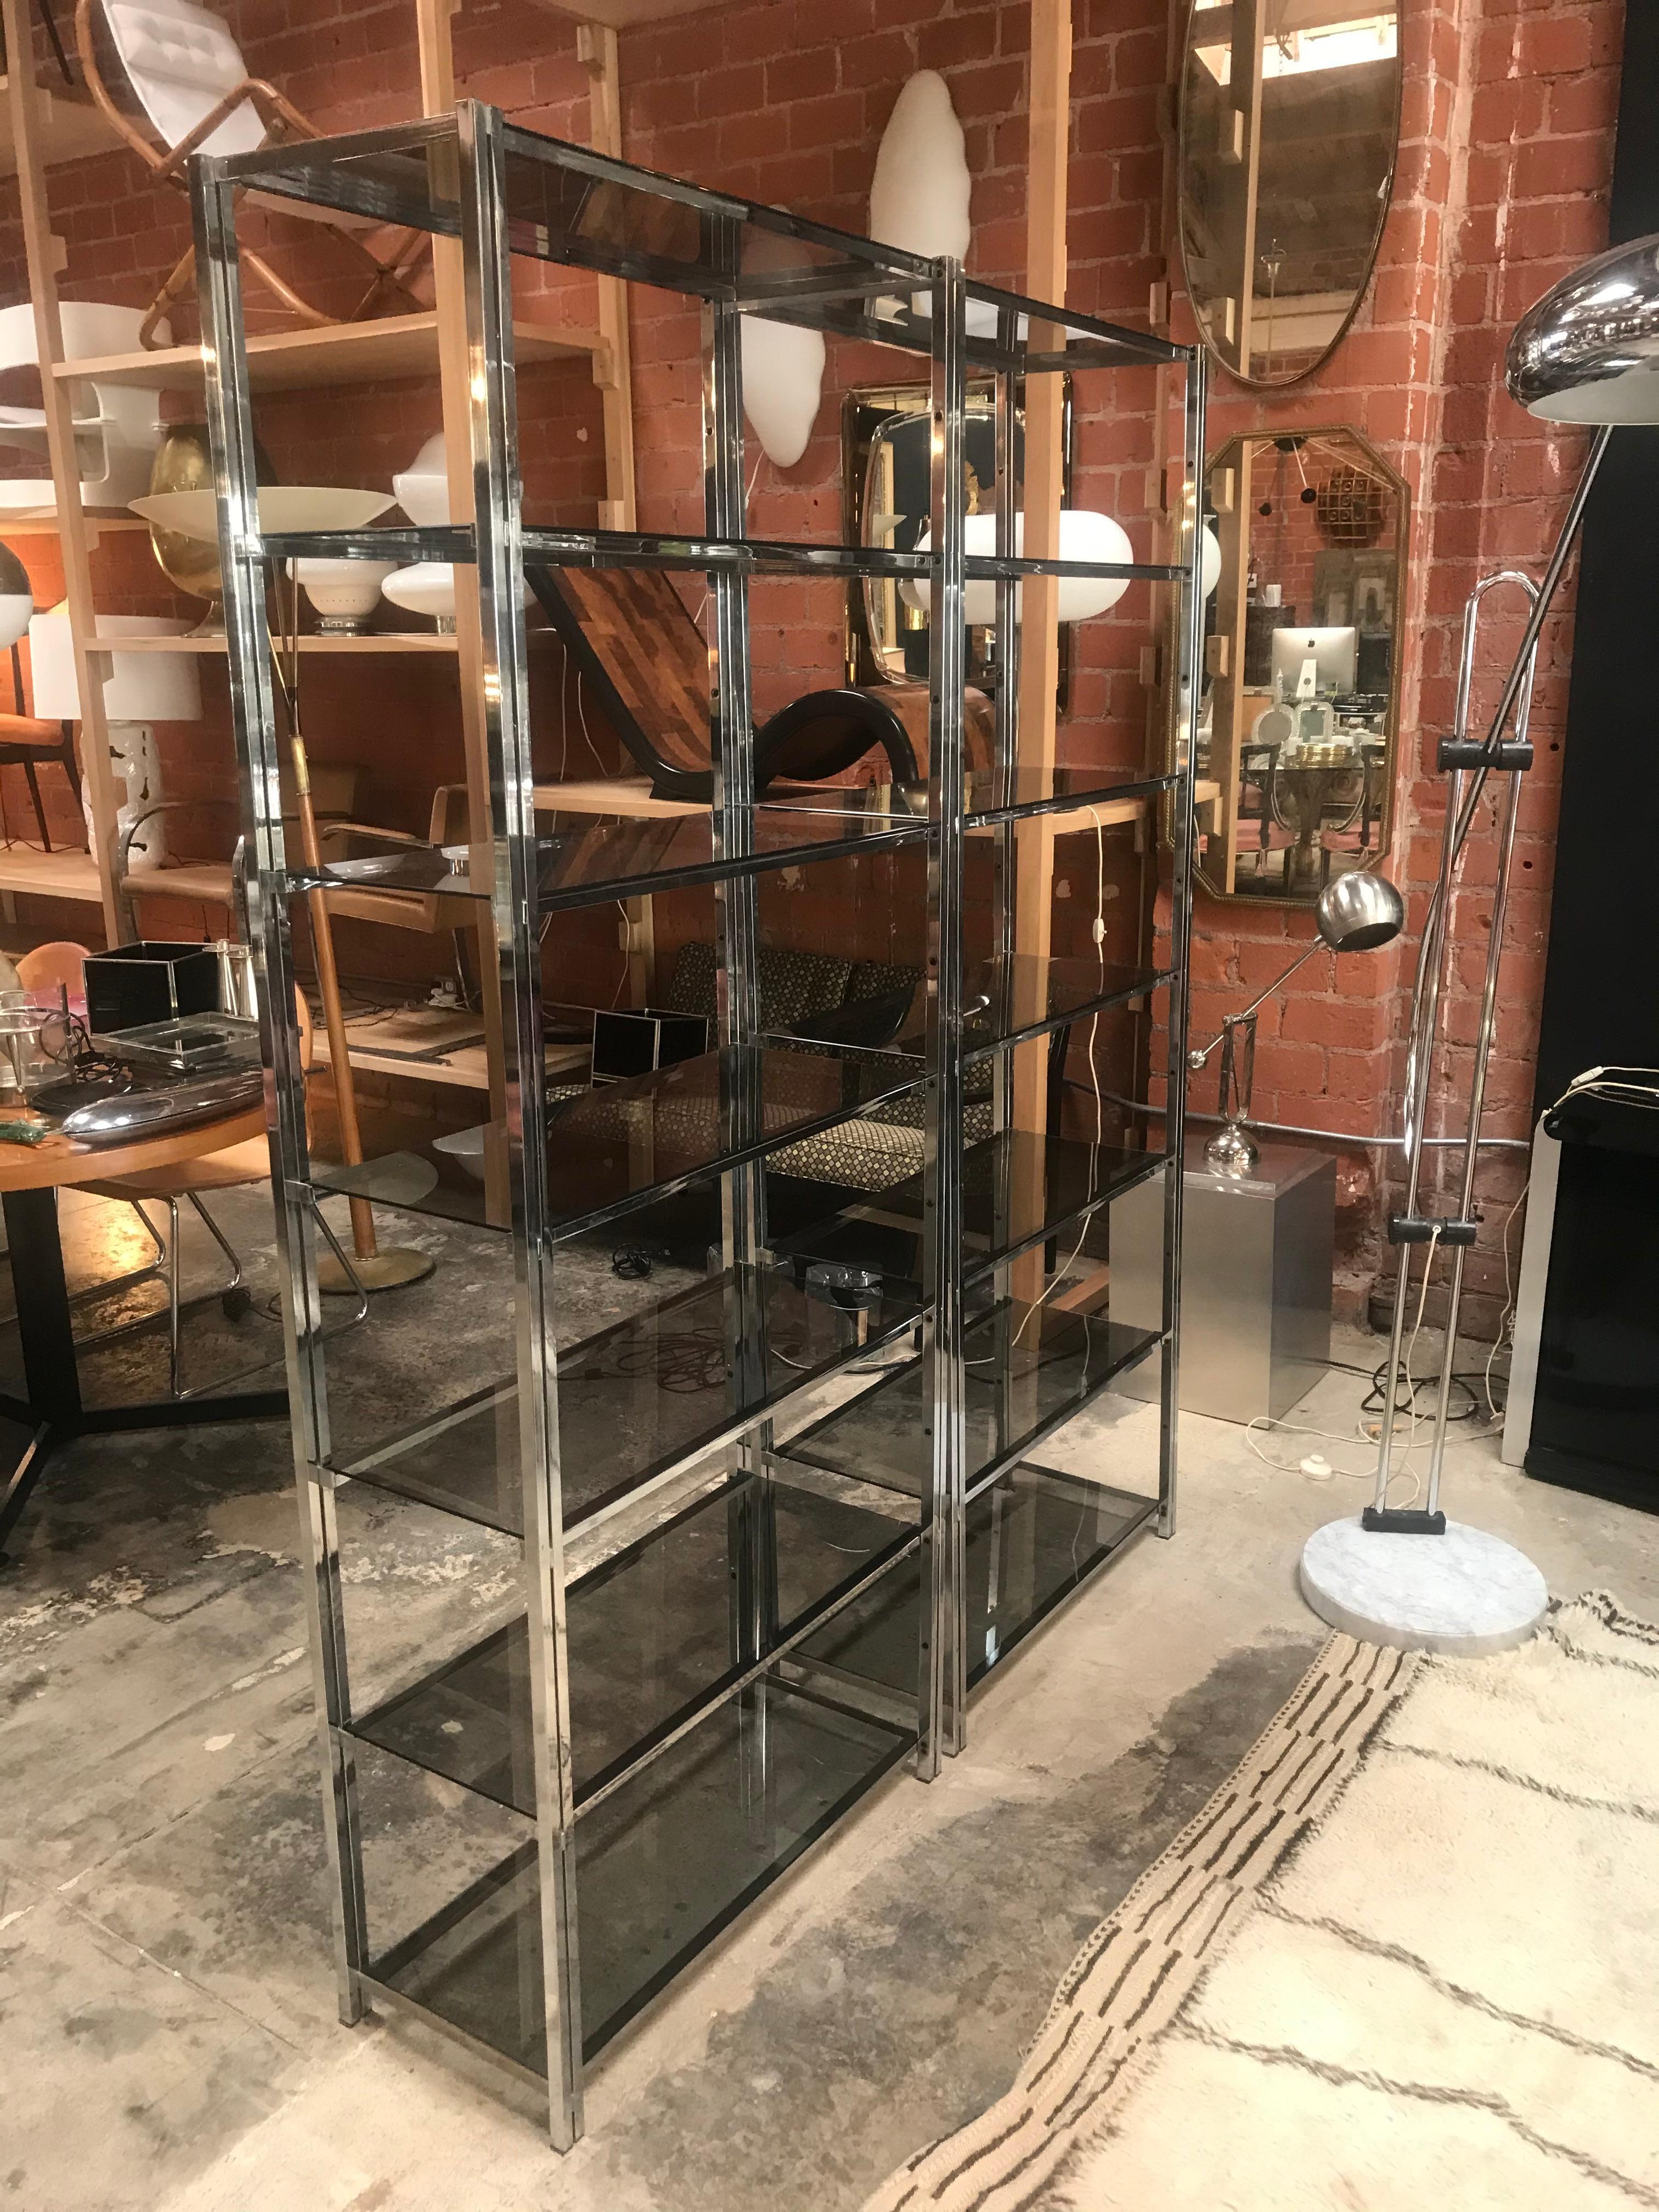 Pair of Mid-Century Modern chrome étagère with six glass shelves.
Minimalist look but great storage. Clean, sophisticated lines make this a Classic for all designs.
The dimensions above are regarding each bookcase.